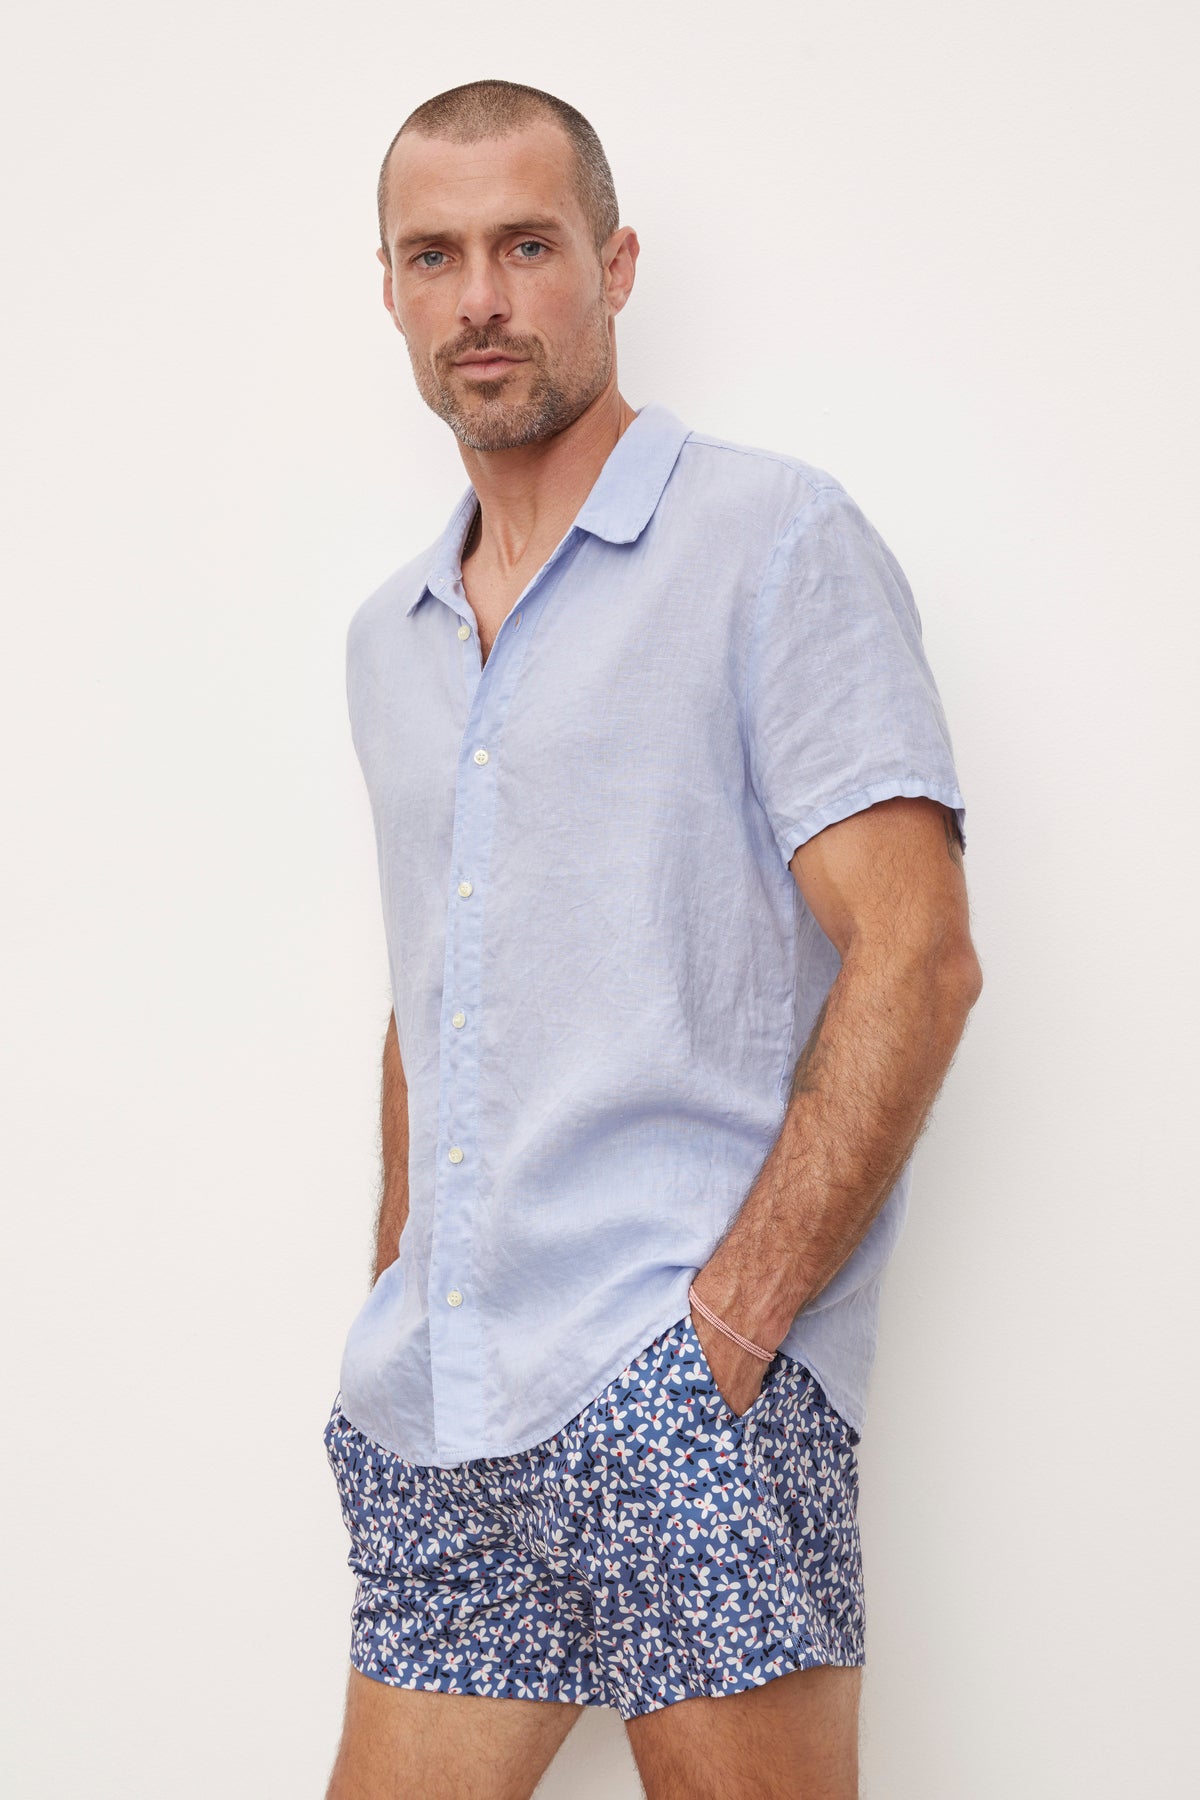   A man in a MACKIE LINEN BUTTON-UP SHIRT by Velvet by Graham & Spencer and patterned shorts standing against a white background, hands in pockets, looking at the camera. 